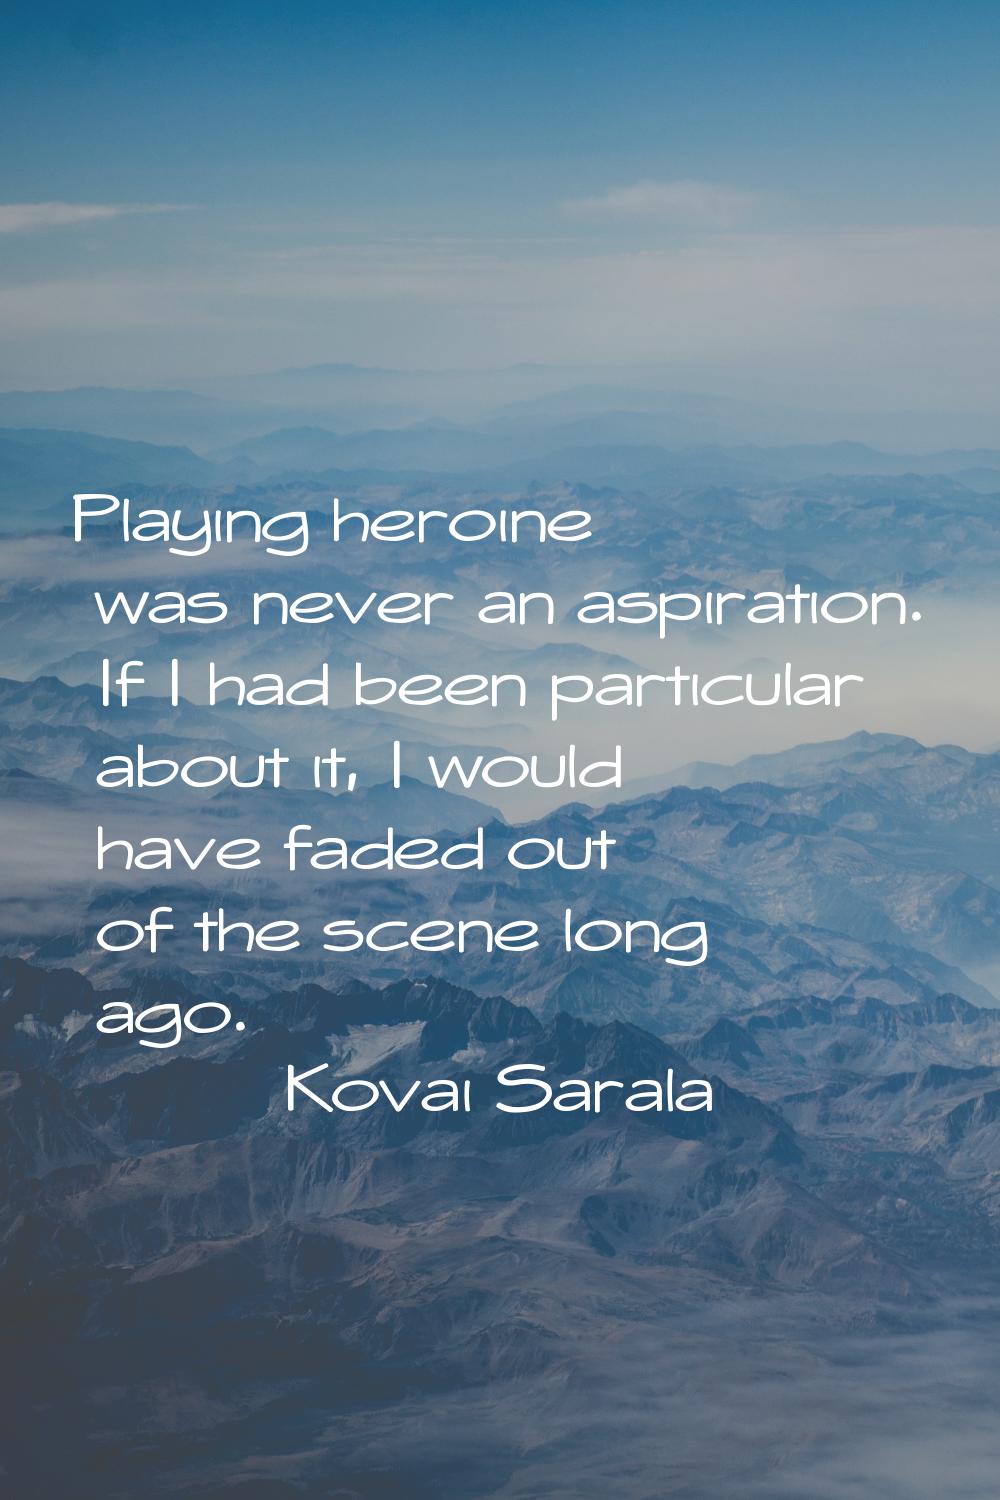 Playing heroine was never an aspiration. If I had been particular about it, I would have faded out 